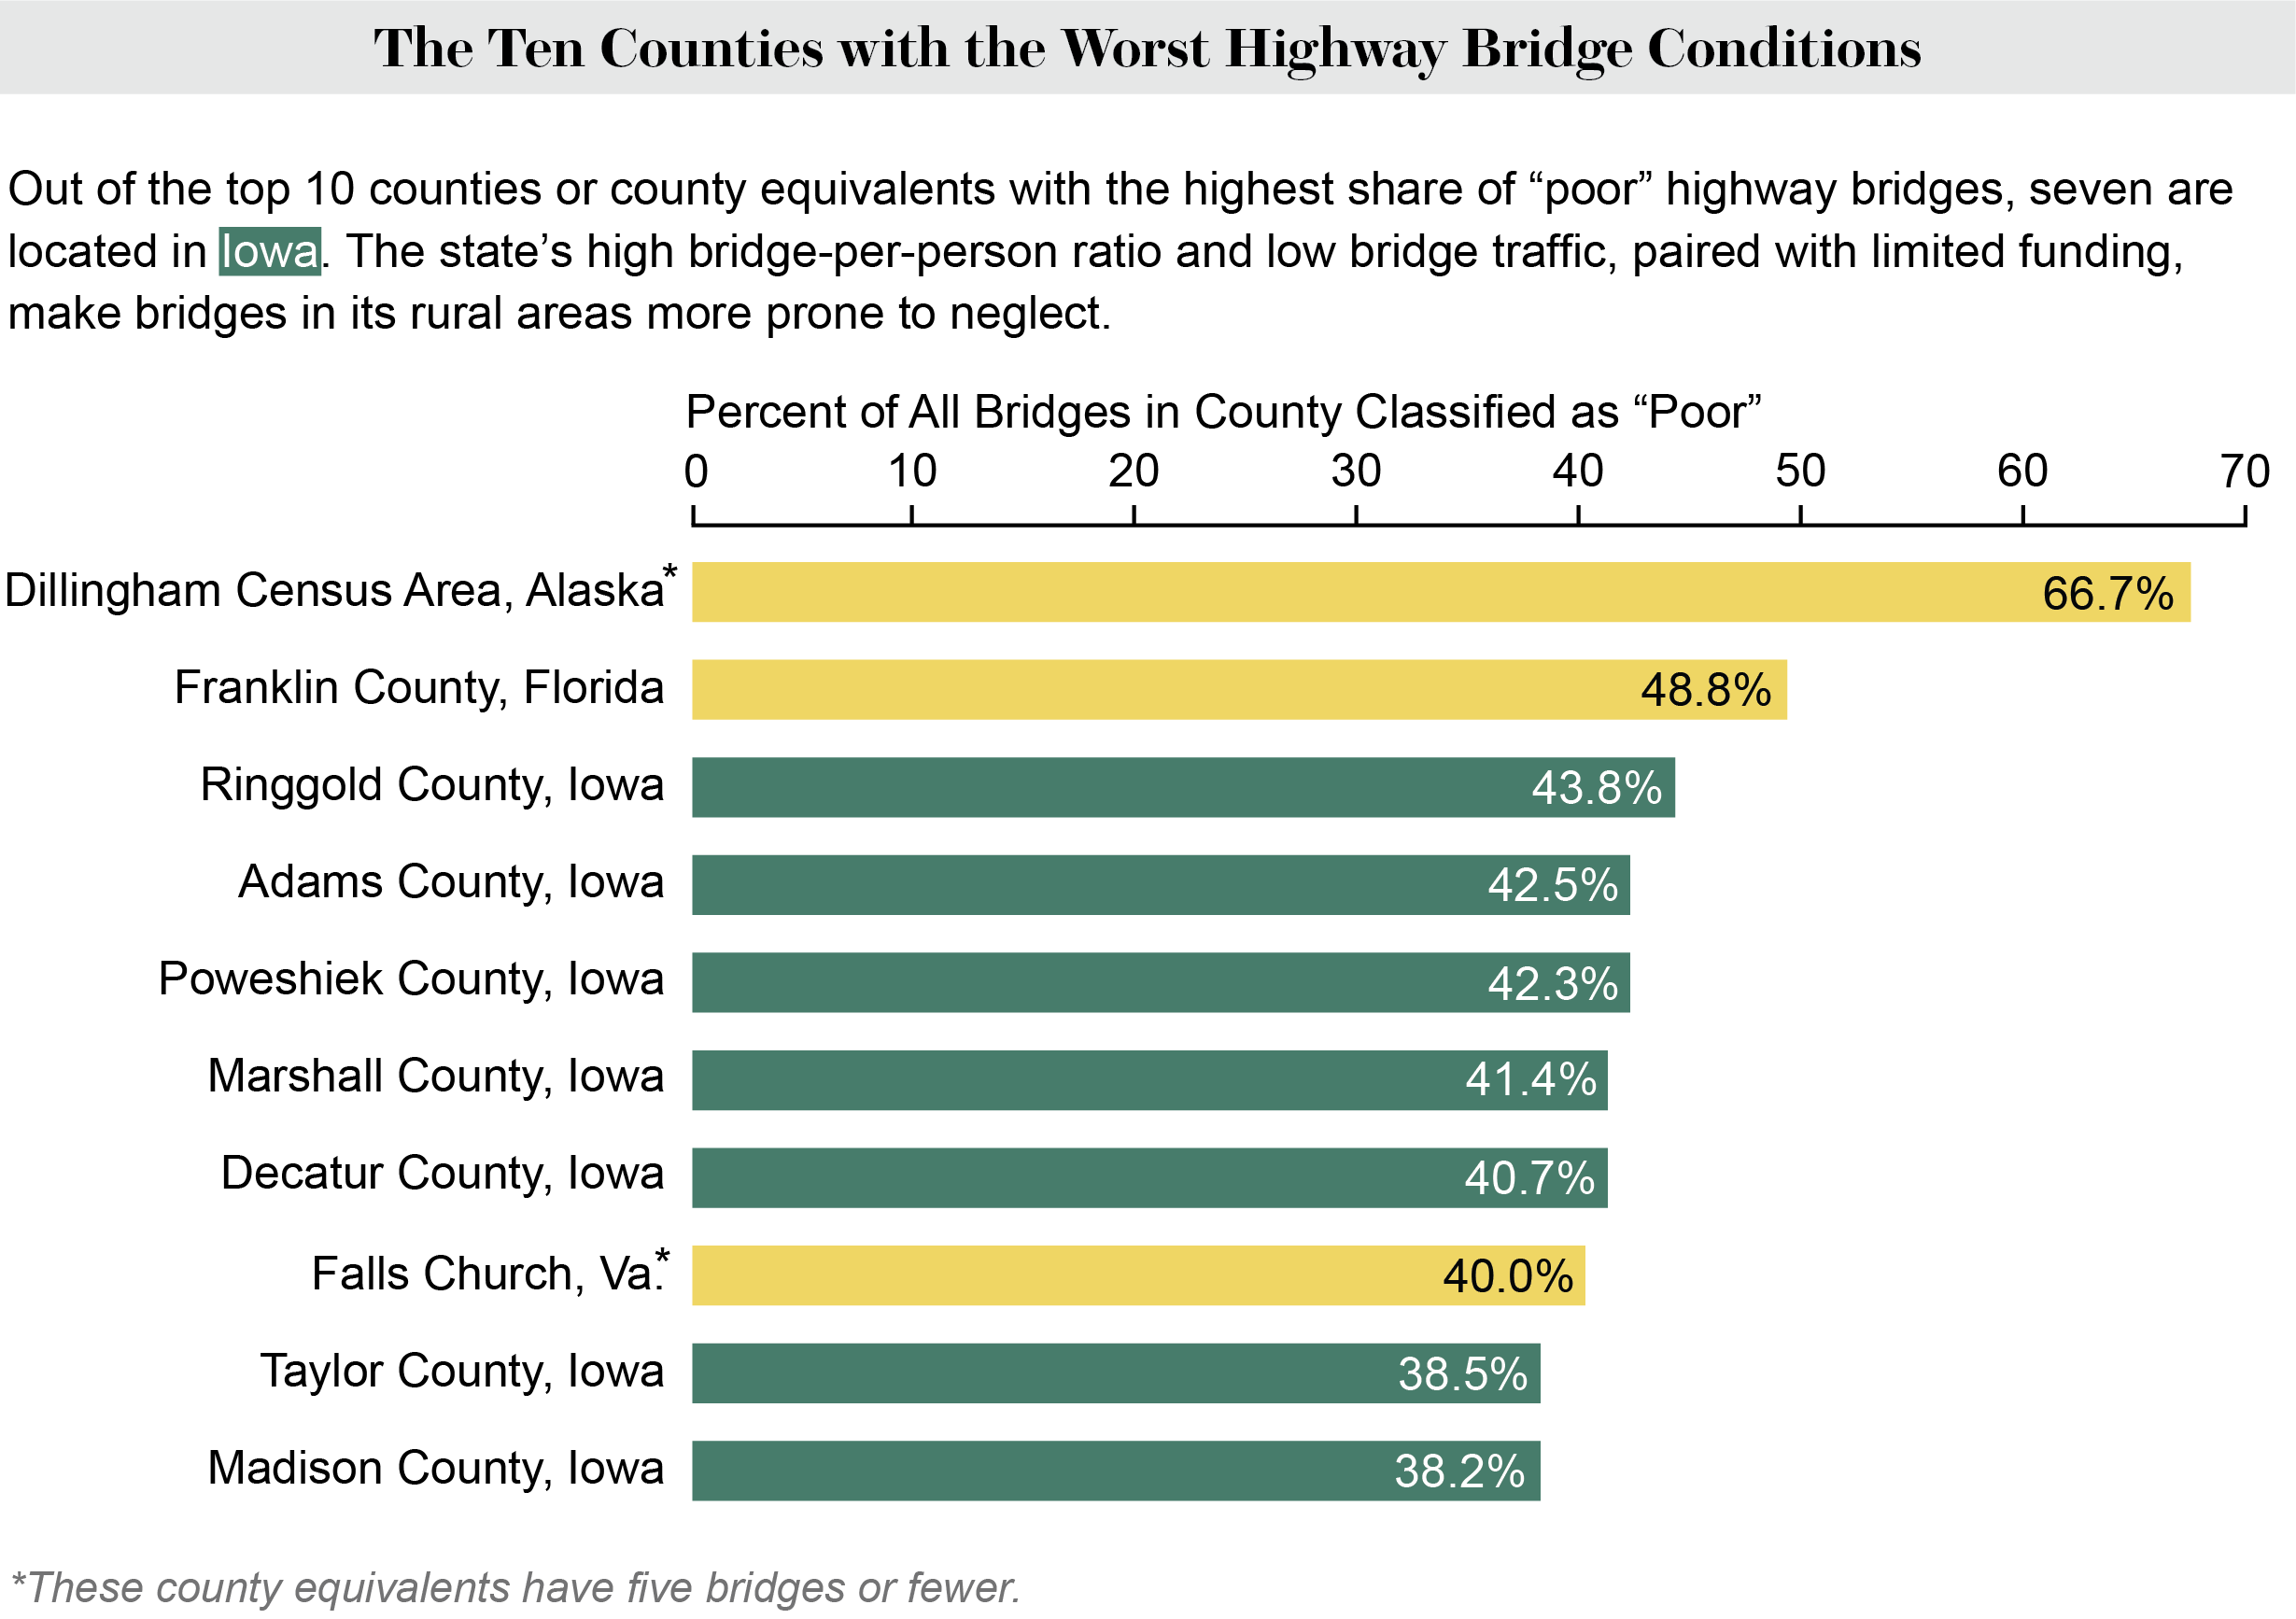 A bar graph shows the 10 counties or county equivalents that have the worst highway bridge conditions.